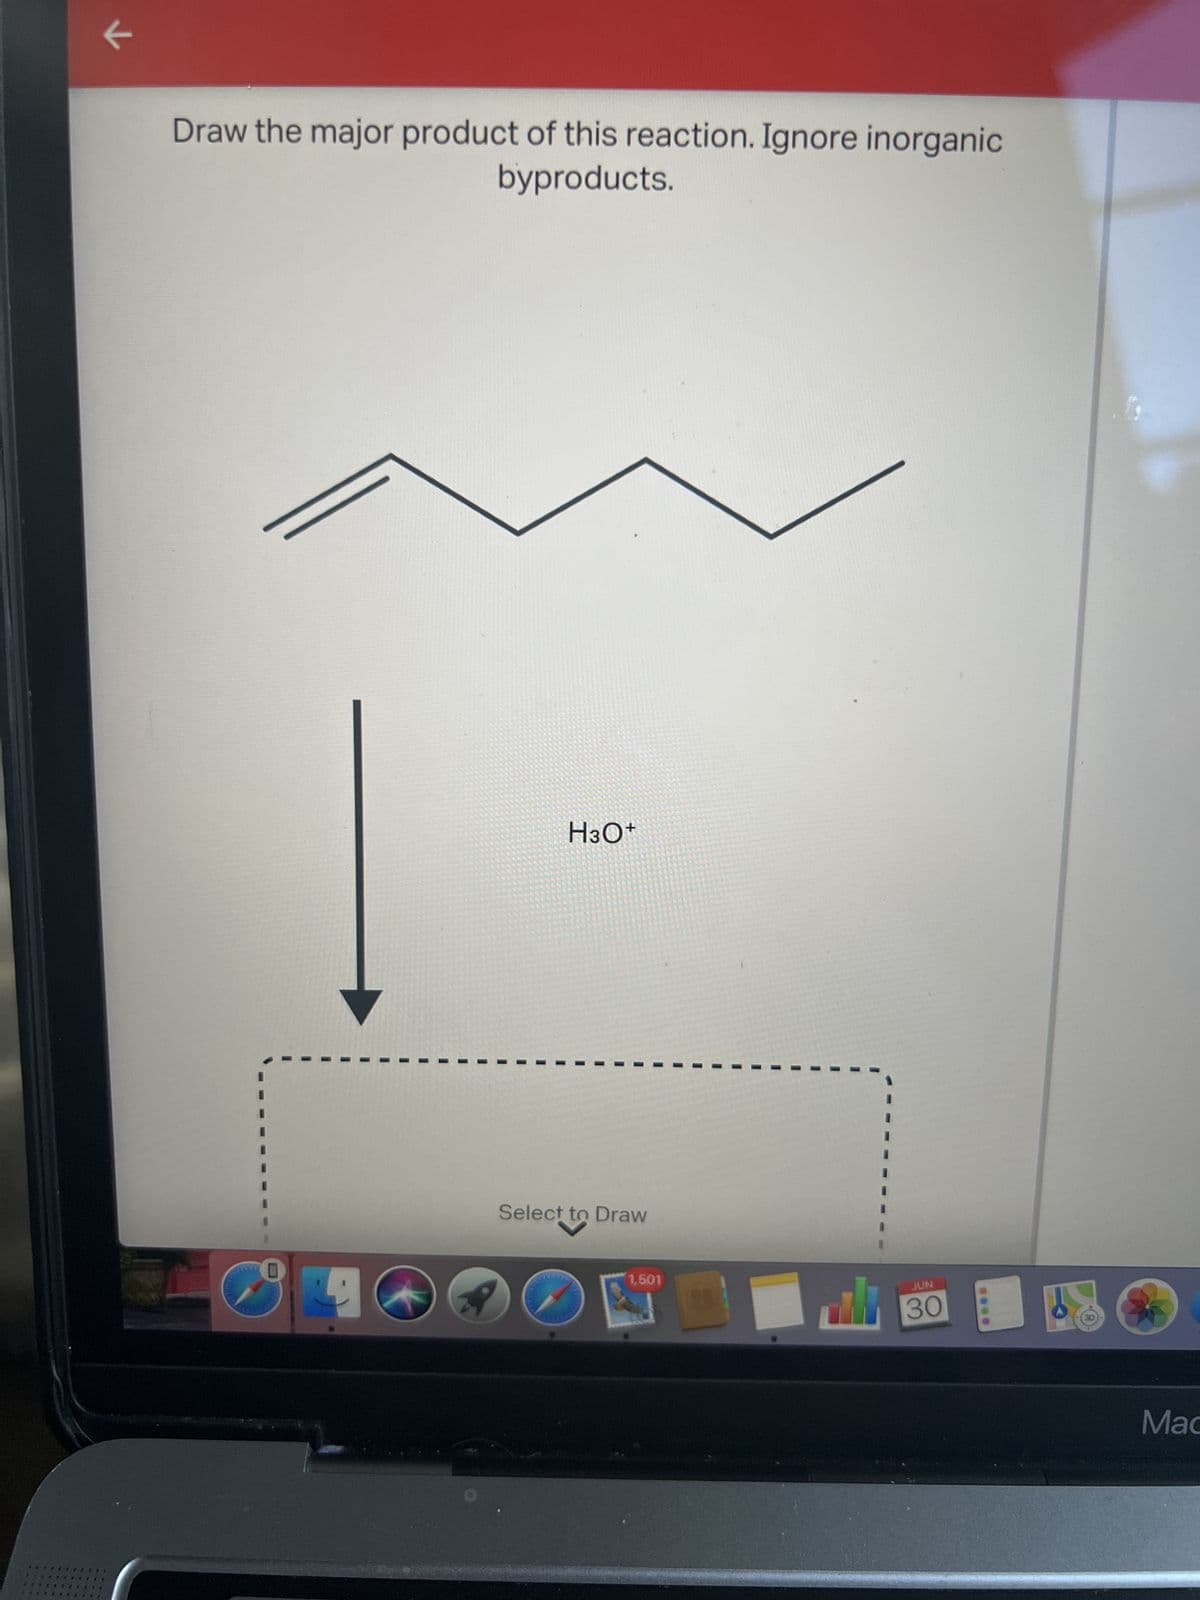 ****4
*****
***********
*******
←
**S
Draw the major product of this reaction. Ignore inorganic
byproducts.
0
19
H3O+
Select to Draw
1,501
S
al
JUN
30
Mac